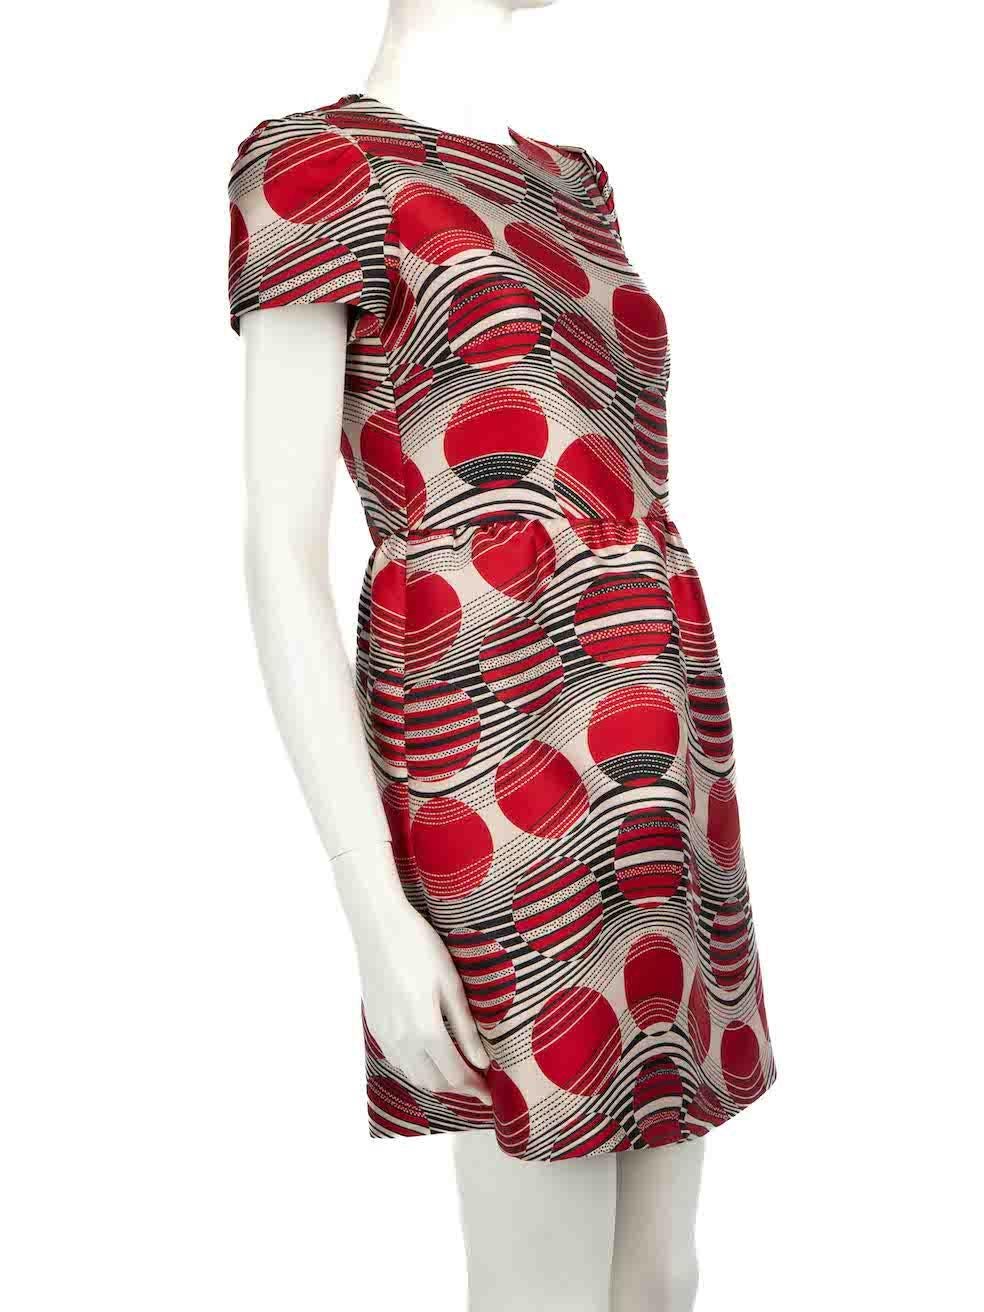 CONDITION is Very good. Minimal wear to dress is evident. Minimal wear to the sides with small plucks to the weave and the hem has come untacked at the lining on this used RED Valentino designer resale item.
 
 
 
 Details
 
 
 Red
 
 Polyester
 
